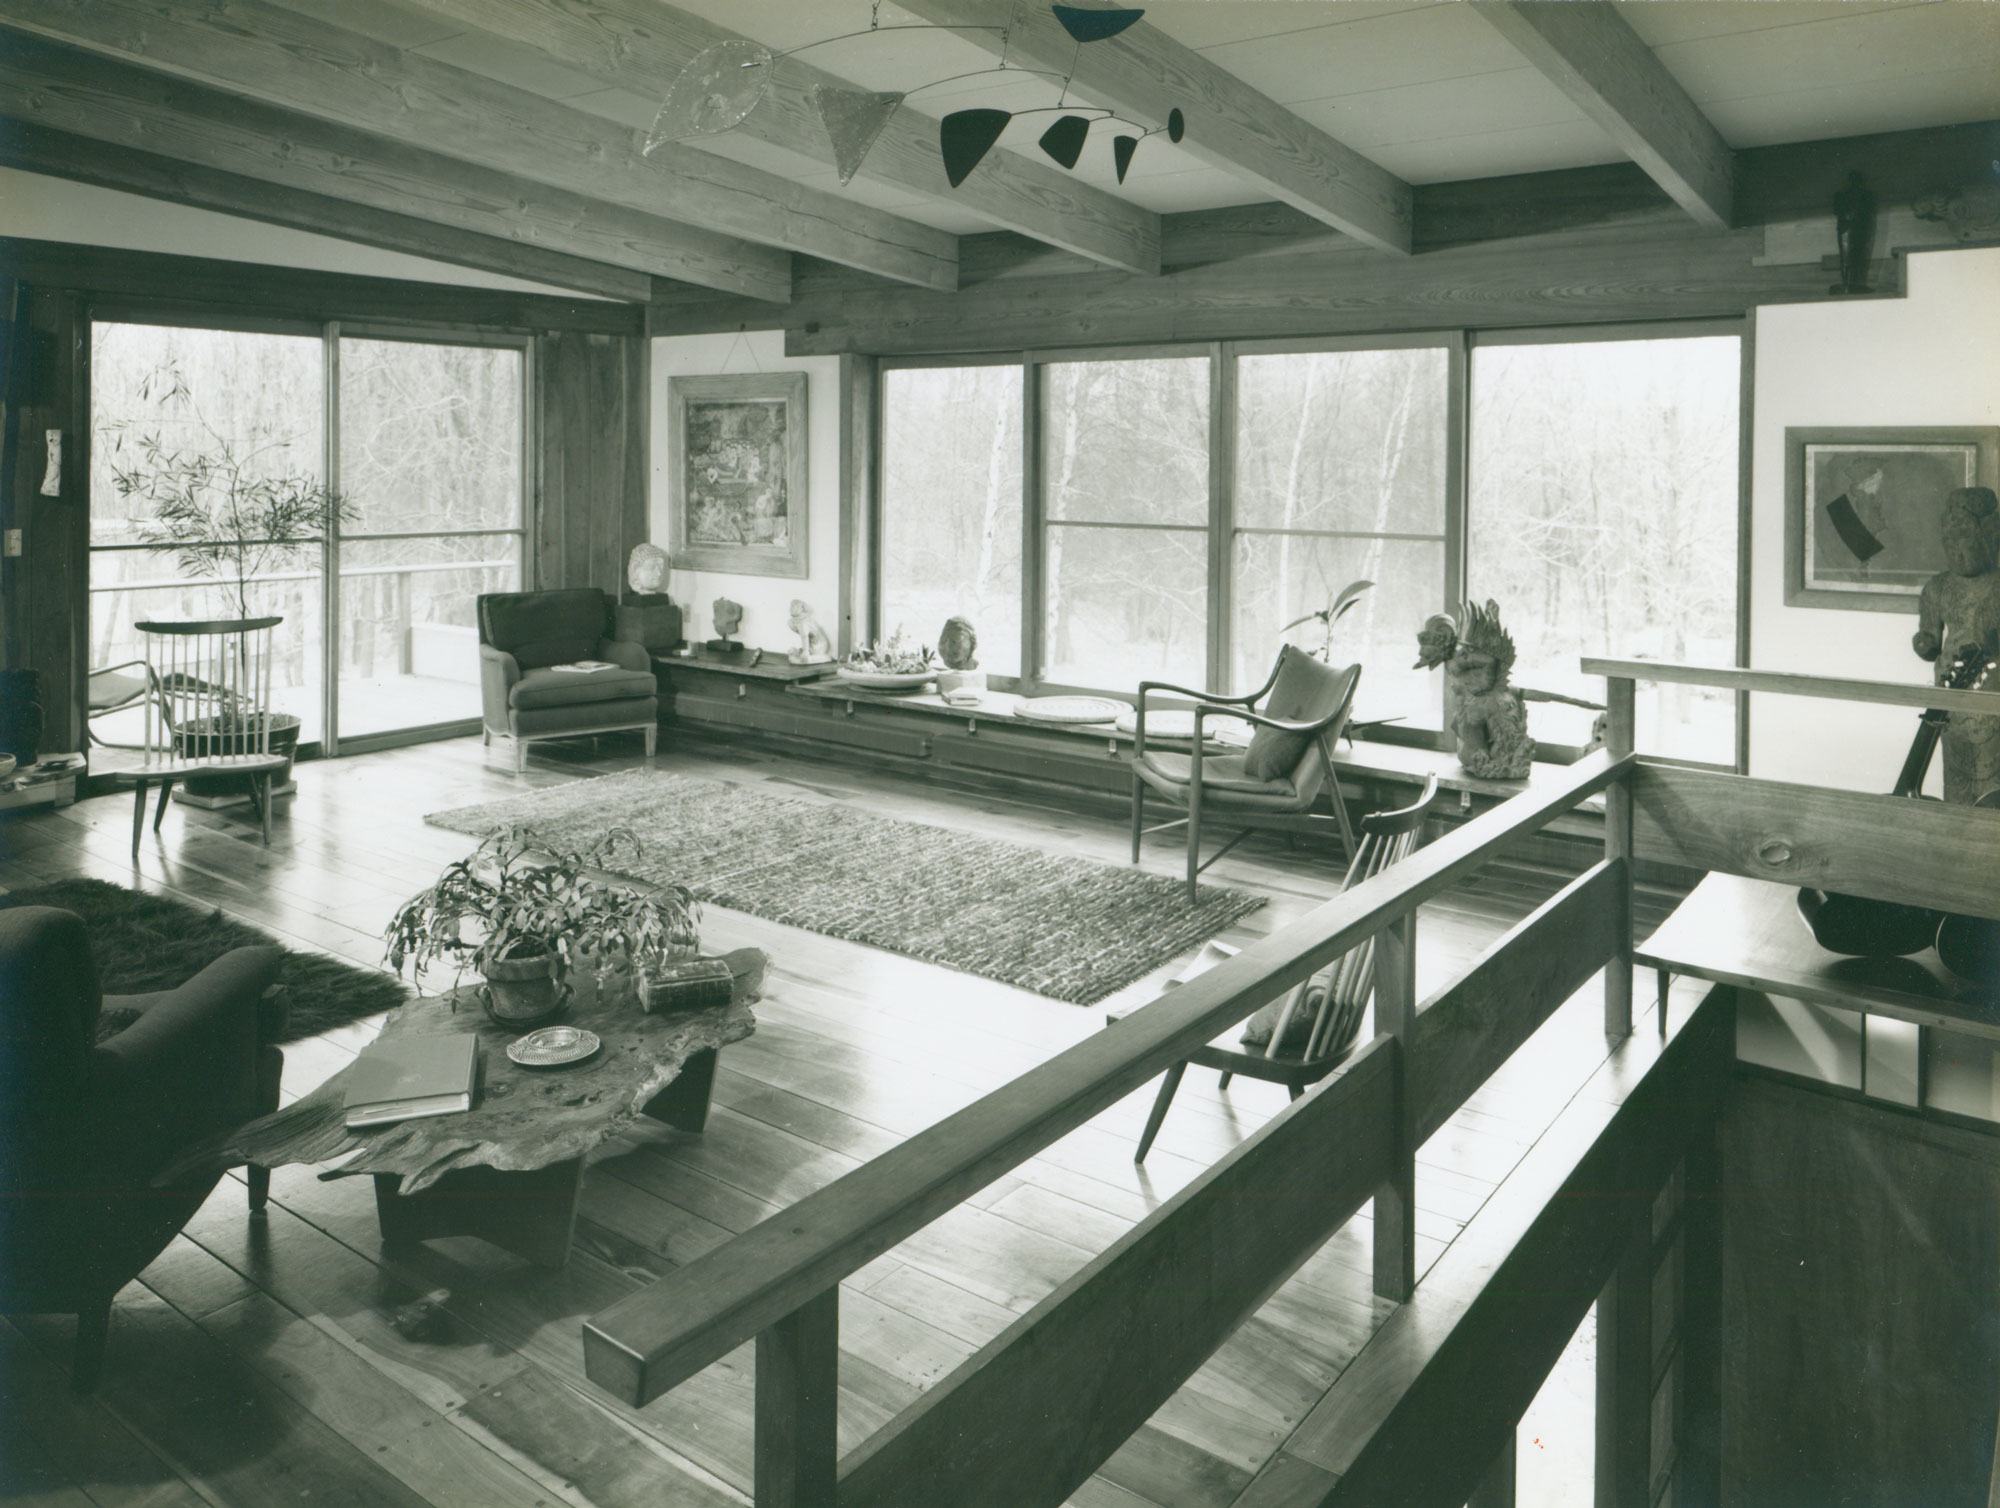 View of living room of mid century moden house